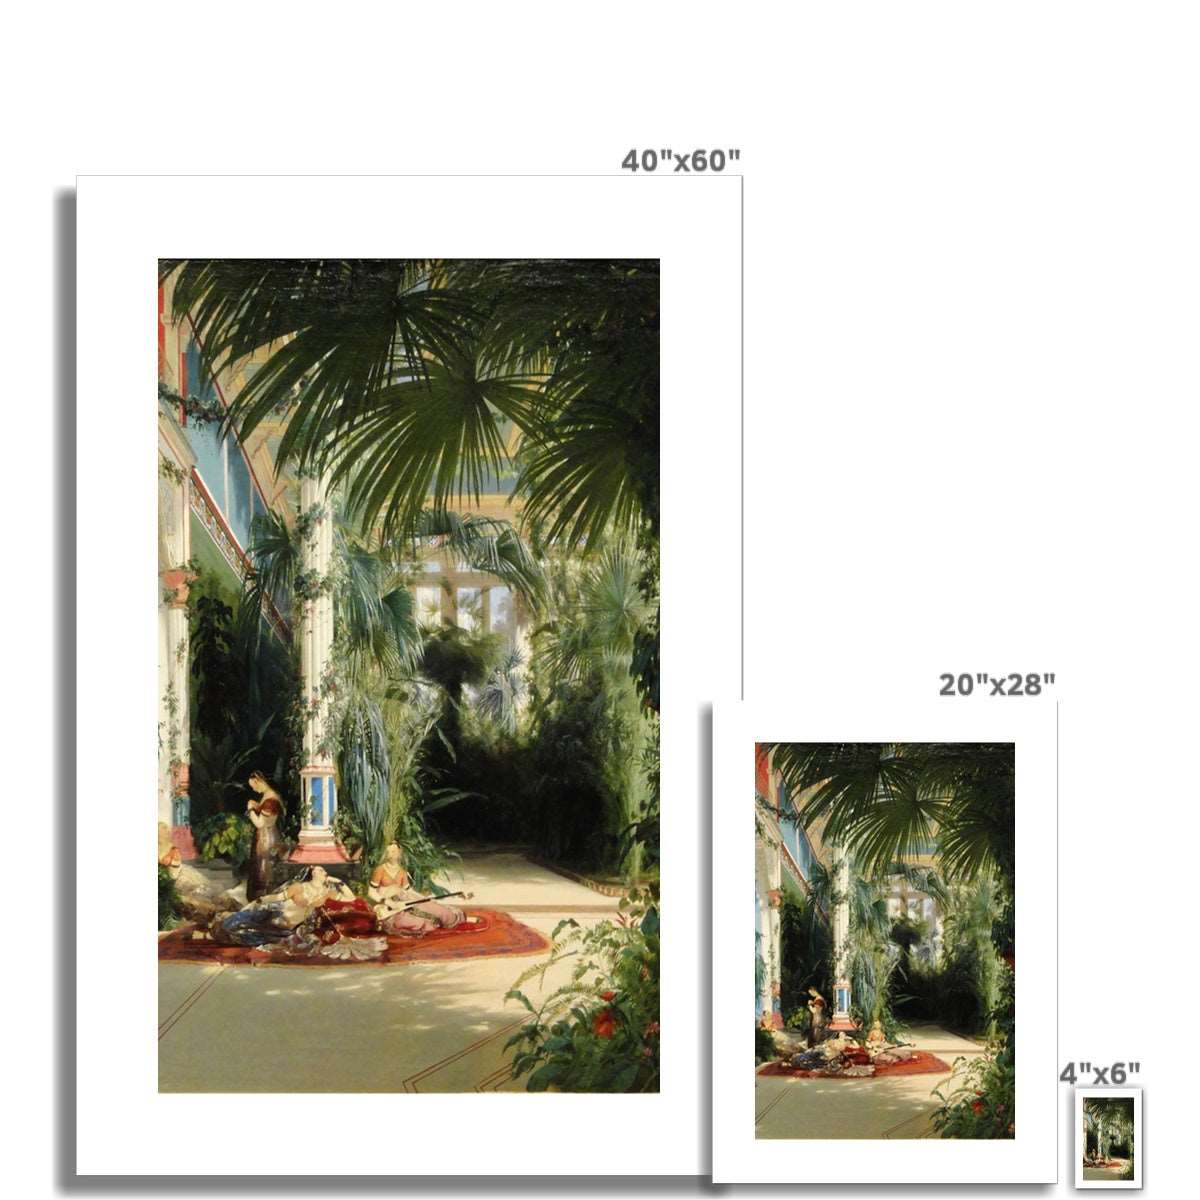 Blechen - In the Palmhouse III Poster - Atopurinto